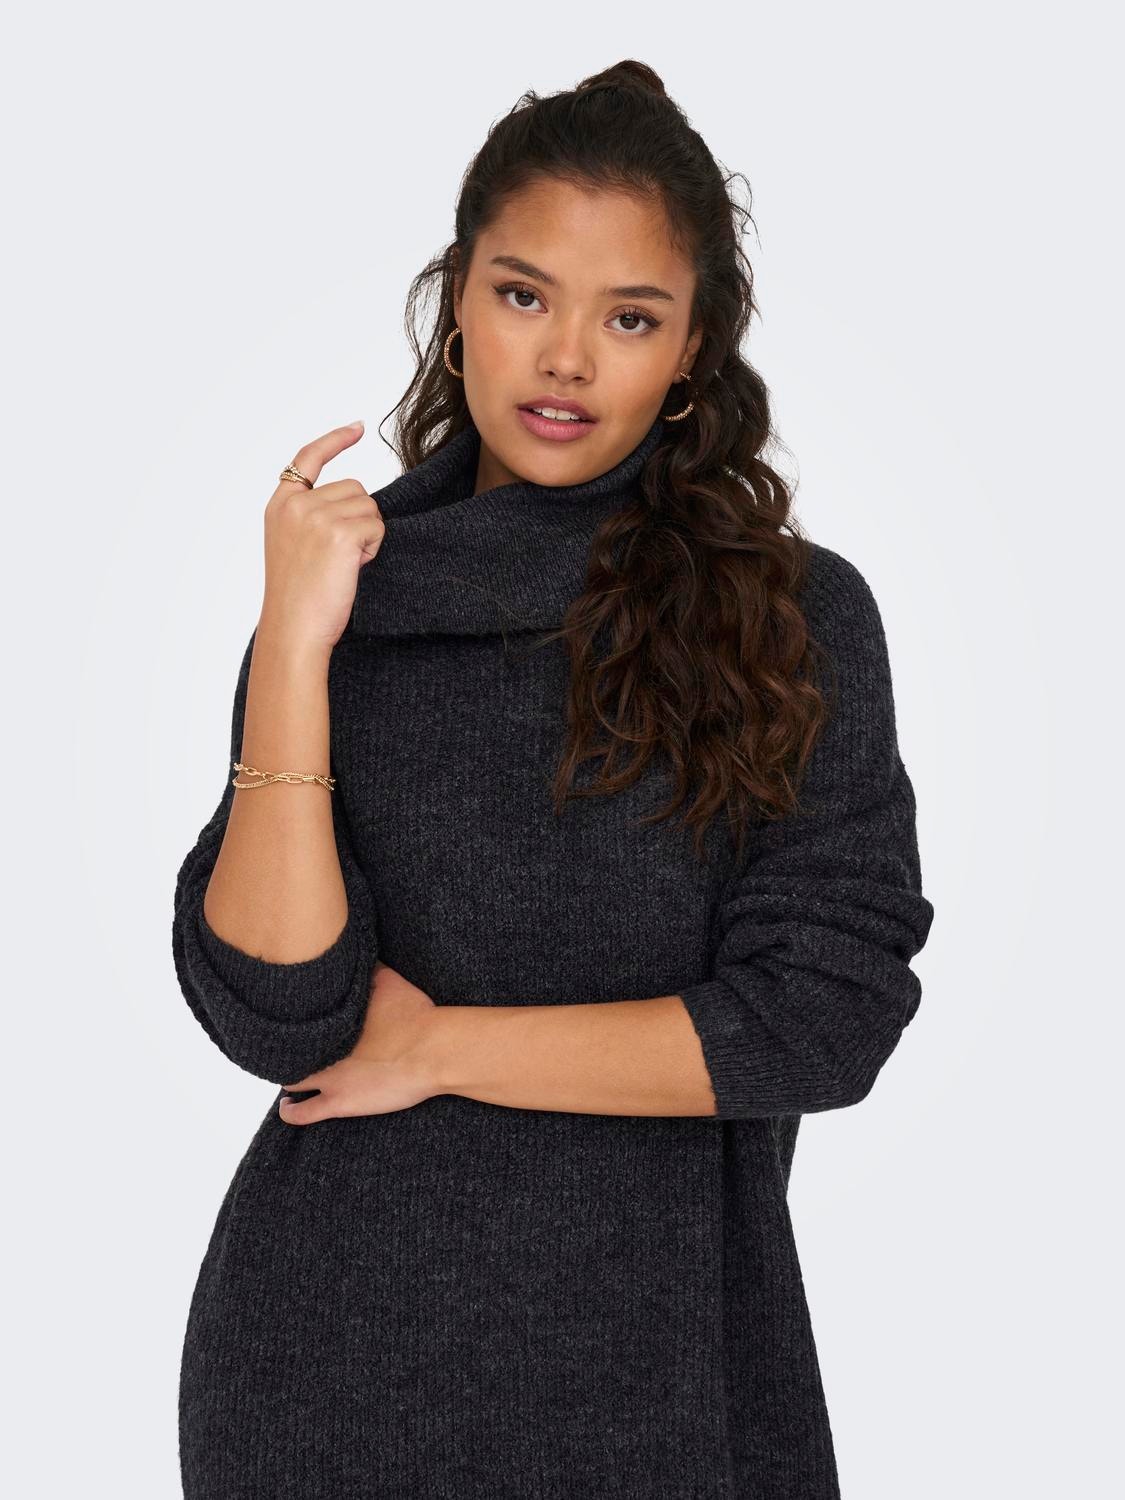 dress Grey knitted | neck Dark ONLY® roll Mini |